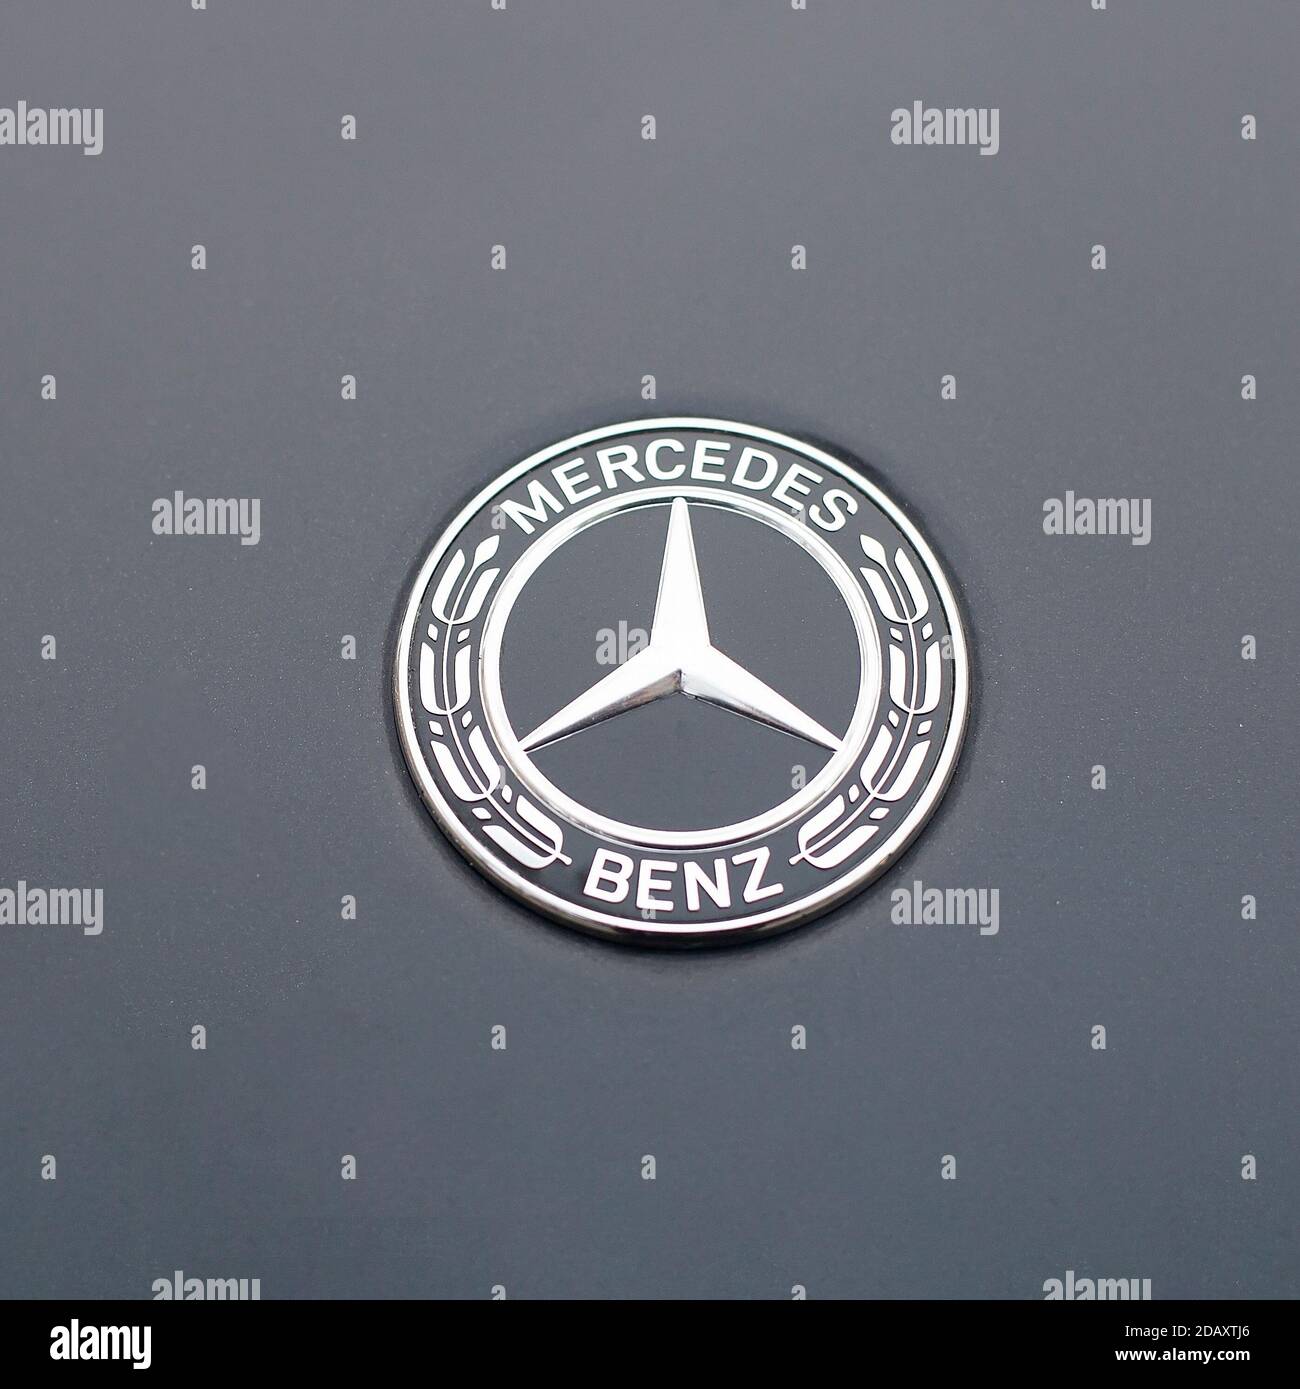 Ivanovo, Russia - November 13, 2020: Mercedes benz logo and badge on the  car. Close up of chromium-plated metal logotype on the dark background  Stock Photo - Alamy